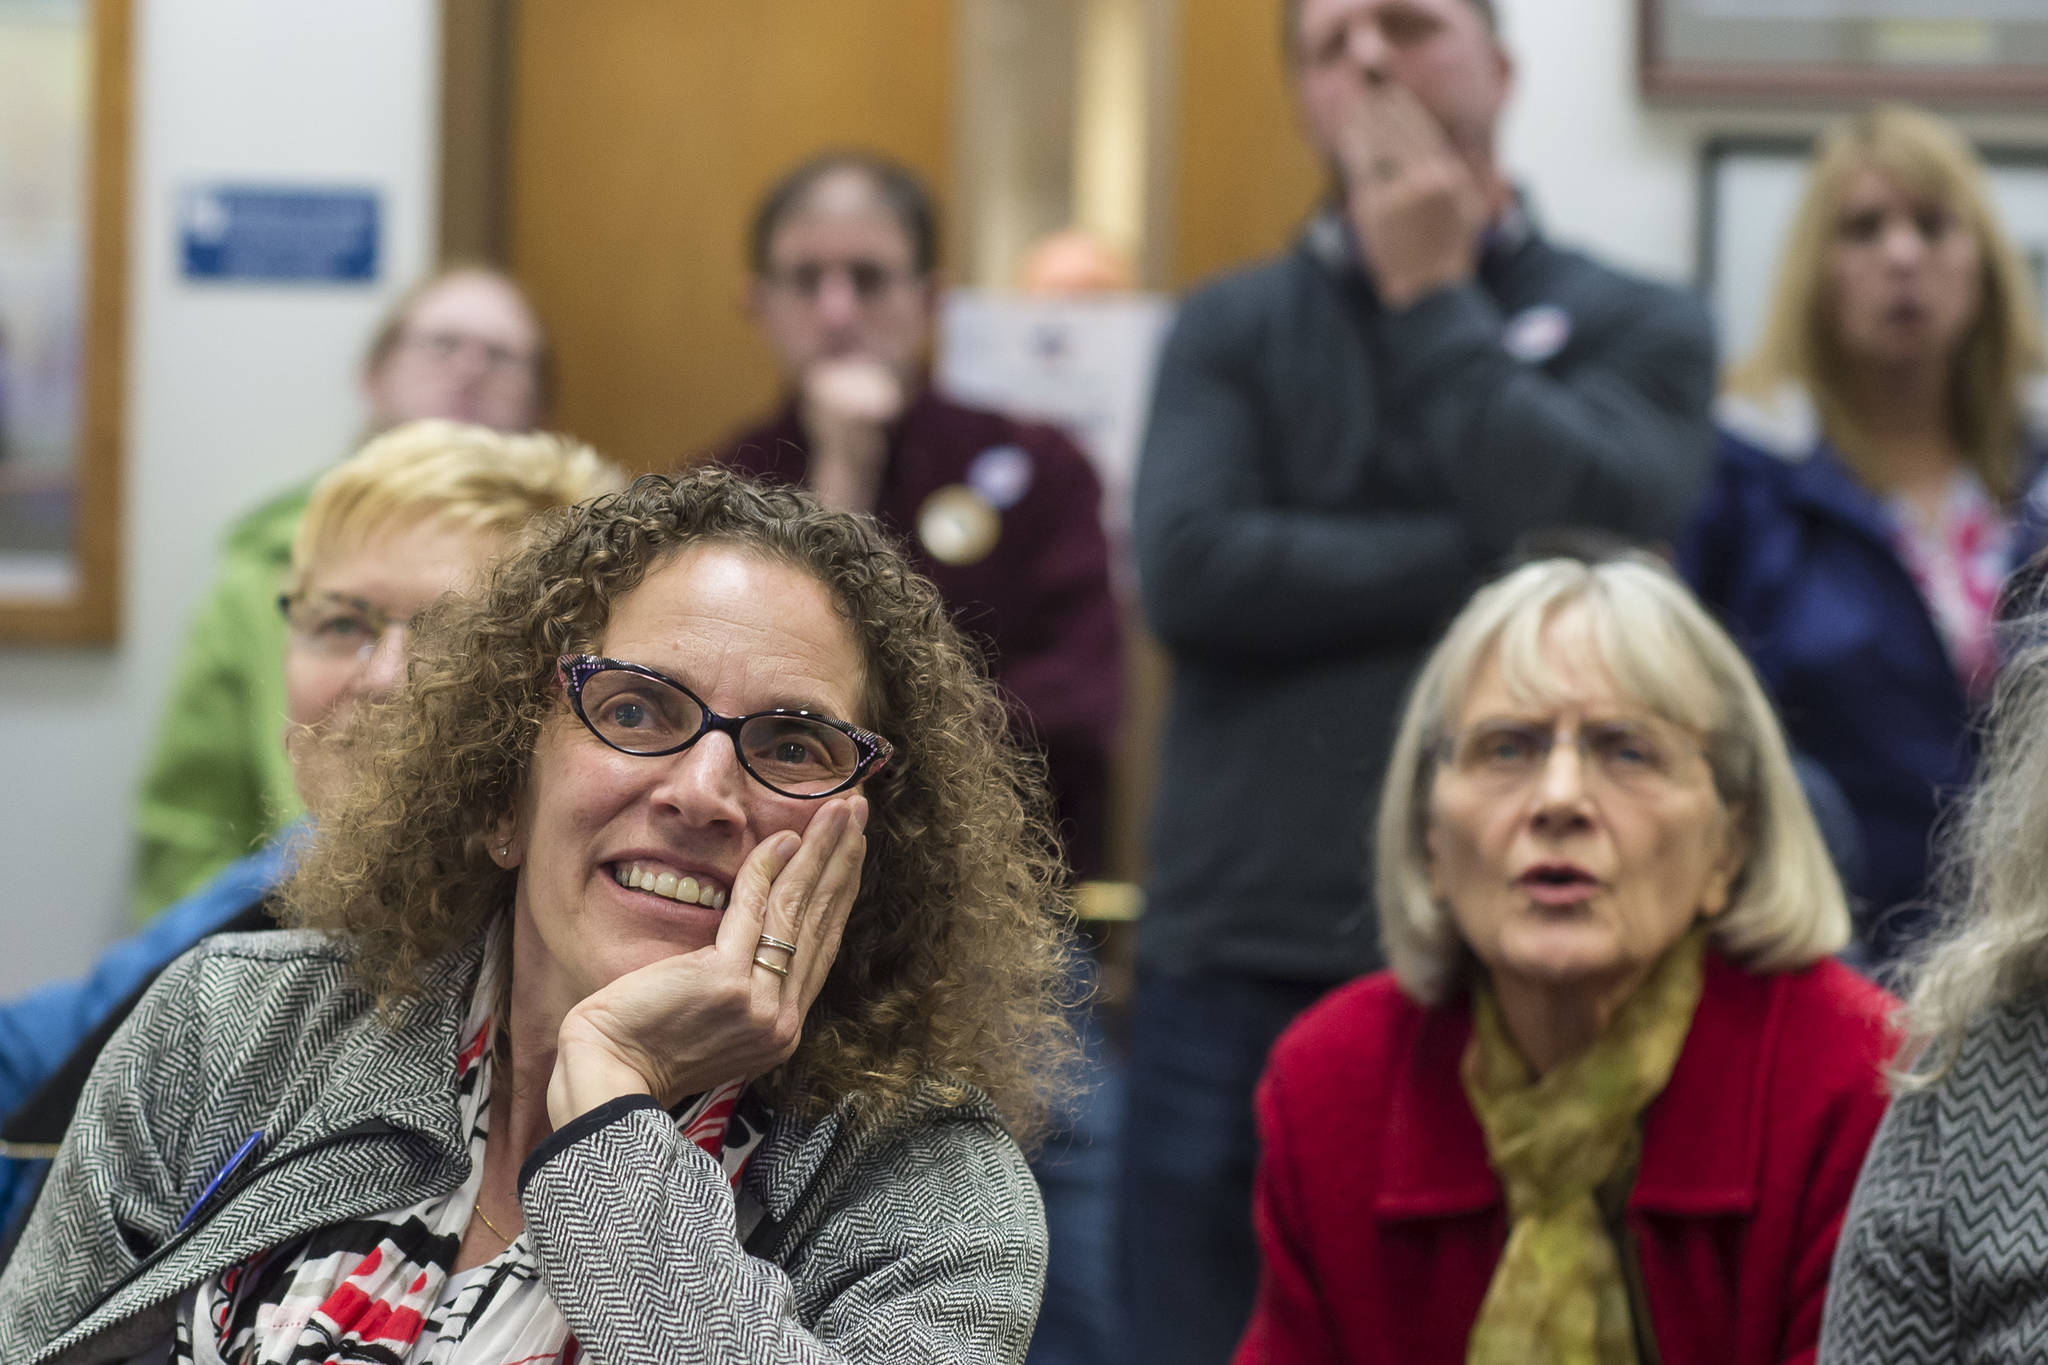 Mayoral candidate Saralyn Tabachnick, left, watches as Election results come in at the Assembly chambers on Tuesday, Oct. 2, 2018. (Michael Penn | Juneau Empire)